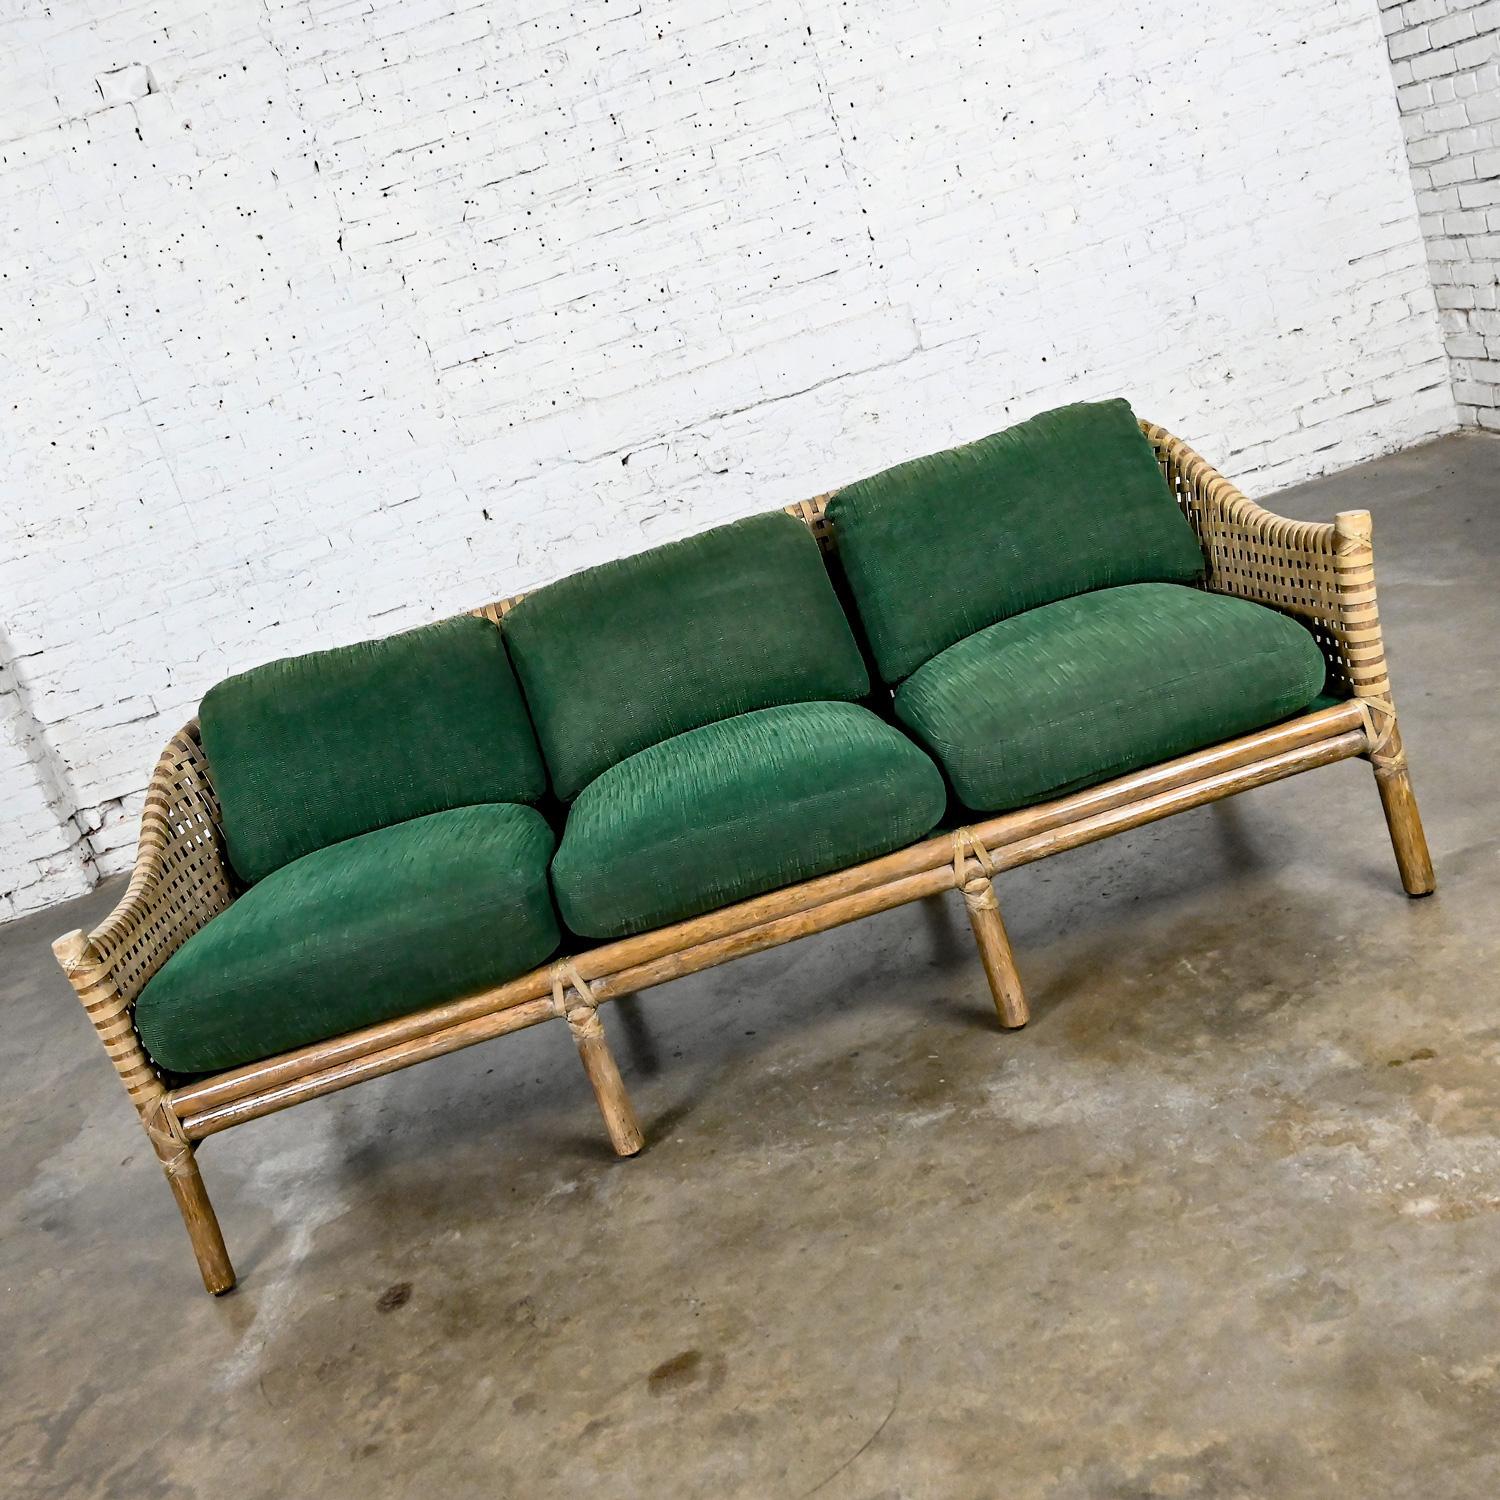 Wonderful vintage modern rattan & woven rawhide sofa or settee with loose green chenille cushions by McGuire. Beautiful condition, keeping in mind that this is vintage and not new so will have signs of use and wear even if it has been refinished or